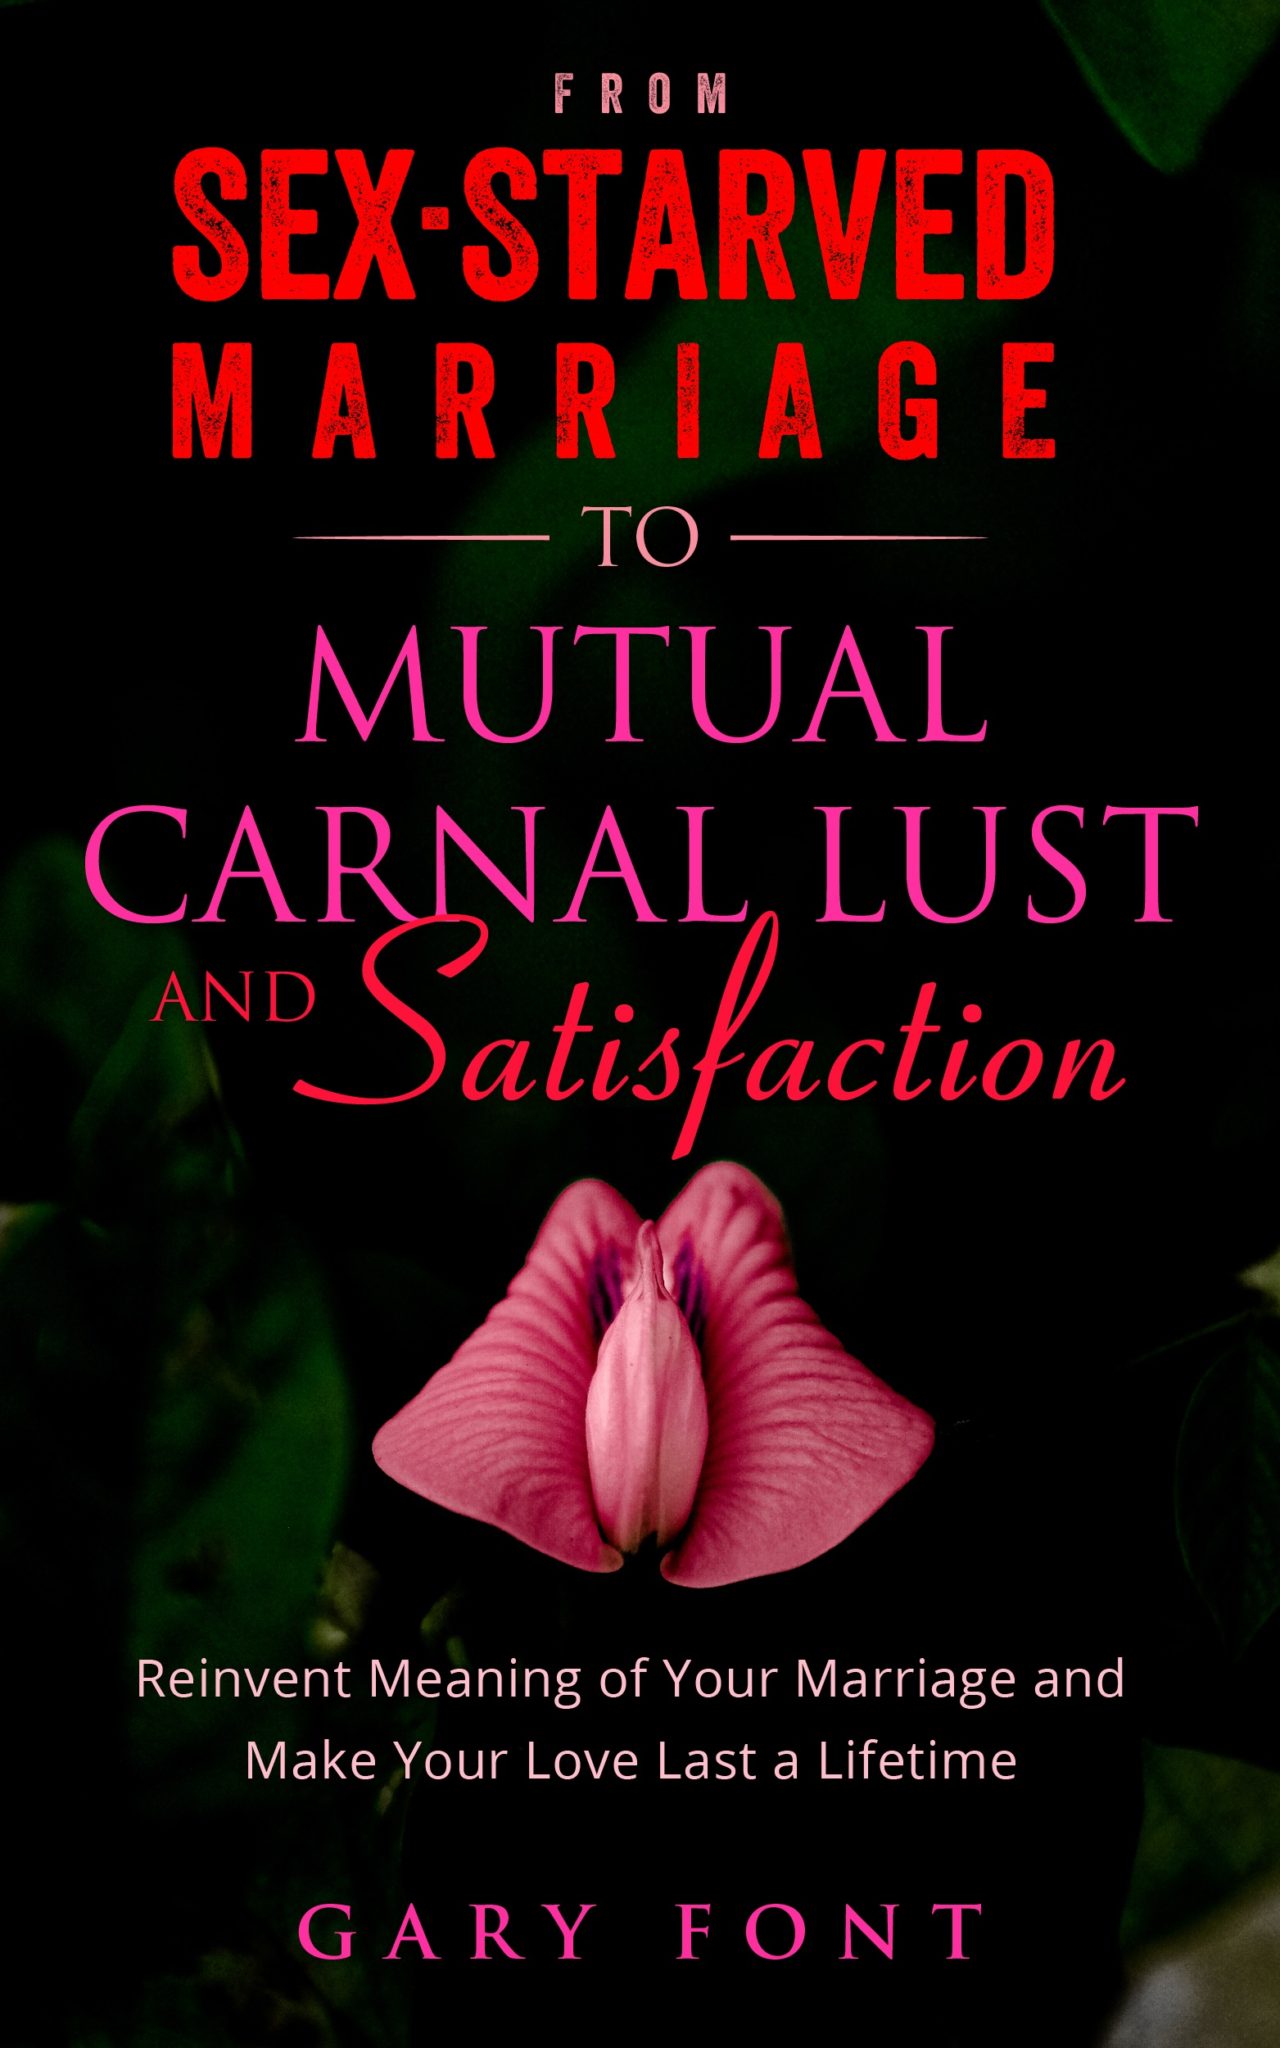 FREE: From Sex-Starved Marriage to Mutual Carnal Lust and Satisfaction: Reinvent the Meaning of Your Marriage and Make Your Love Last a Lifetime by Gary Font